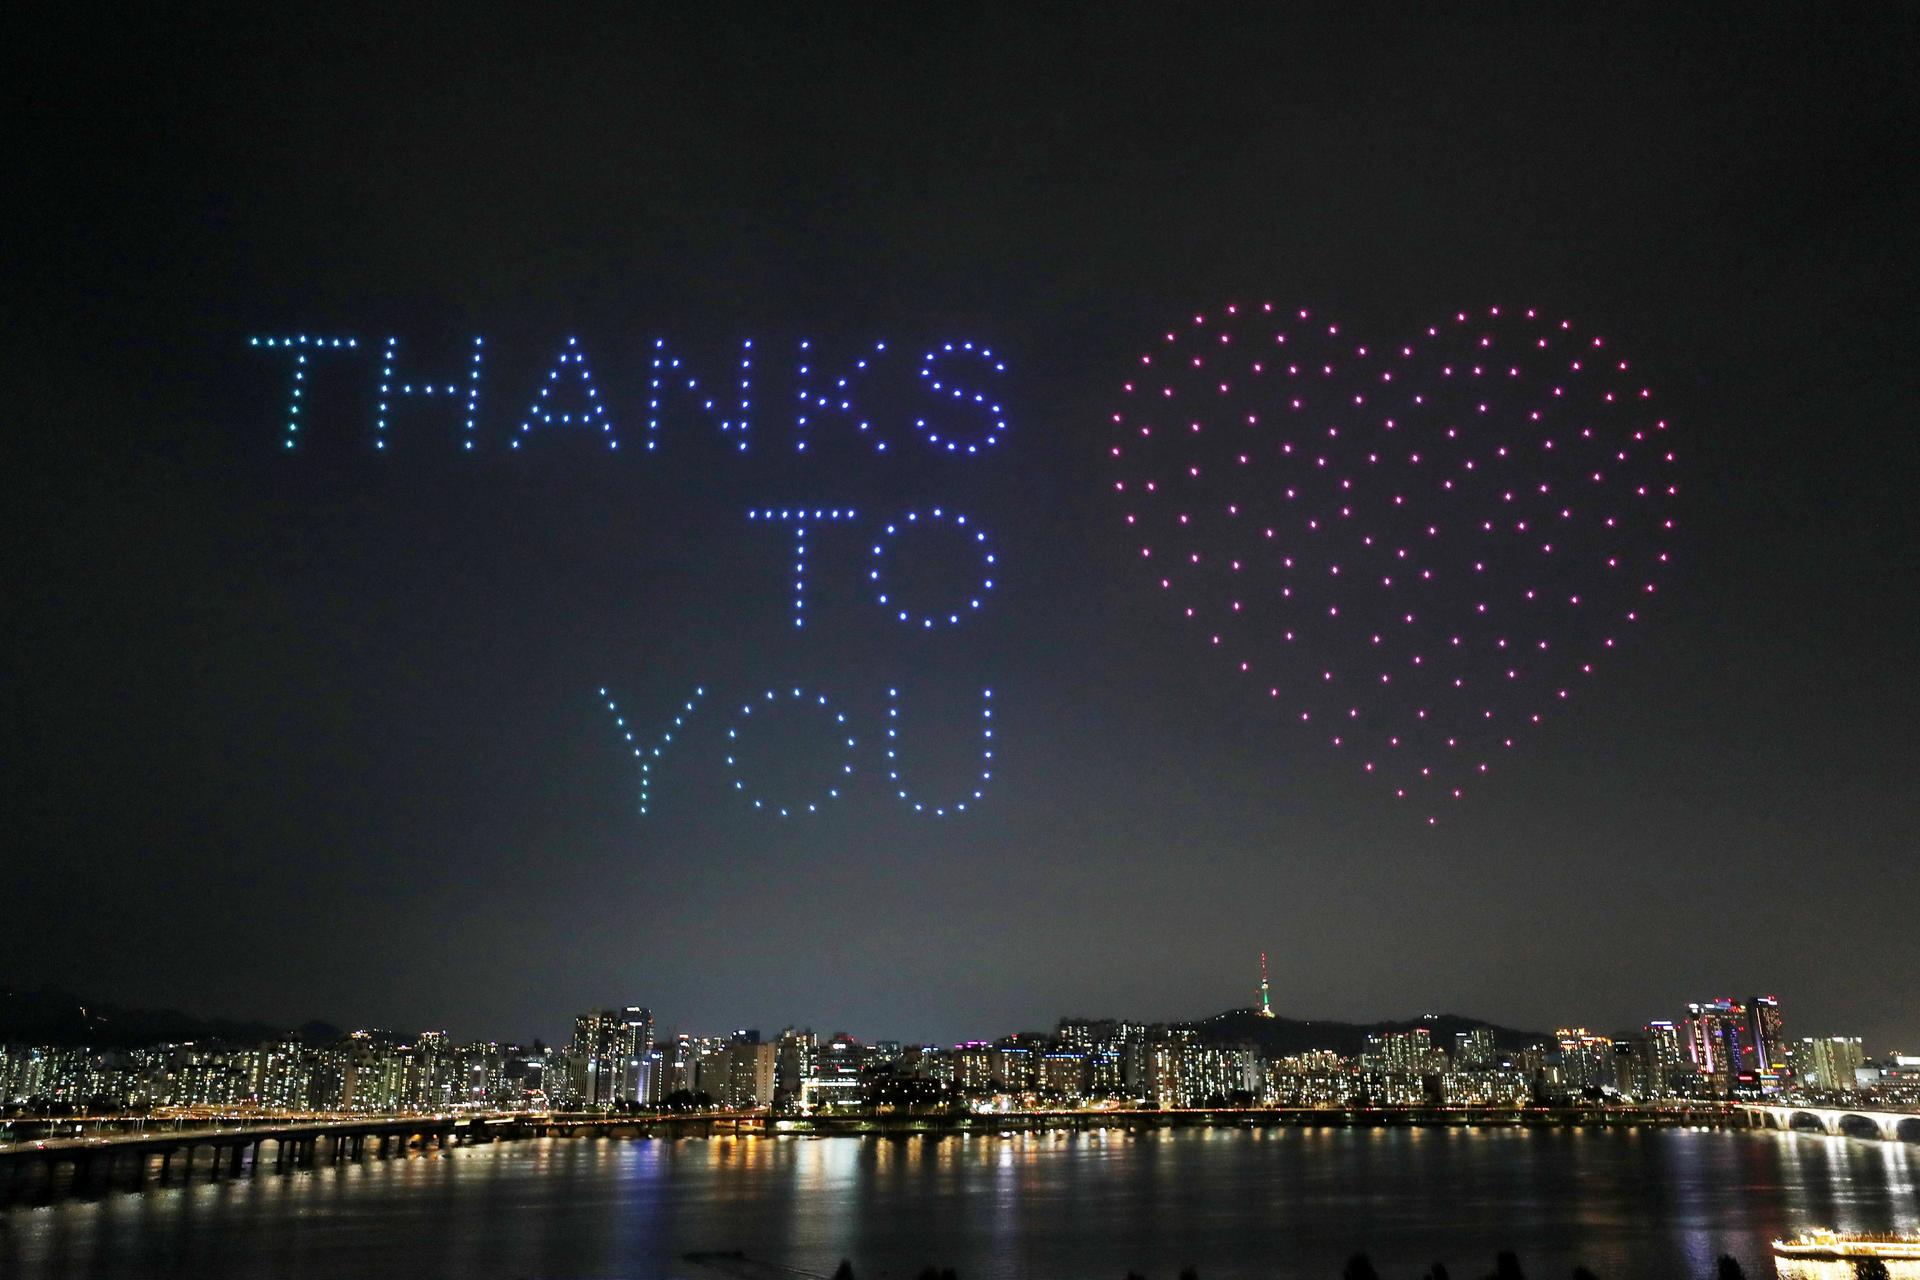 The words Thanks to you are drawn in the sky over a city by lights on drones.